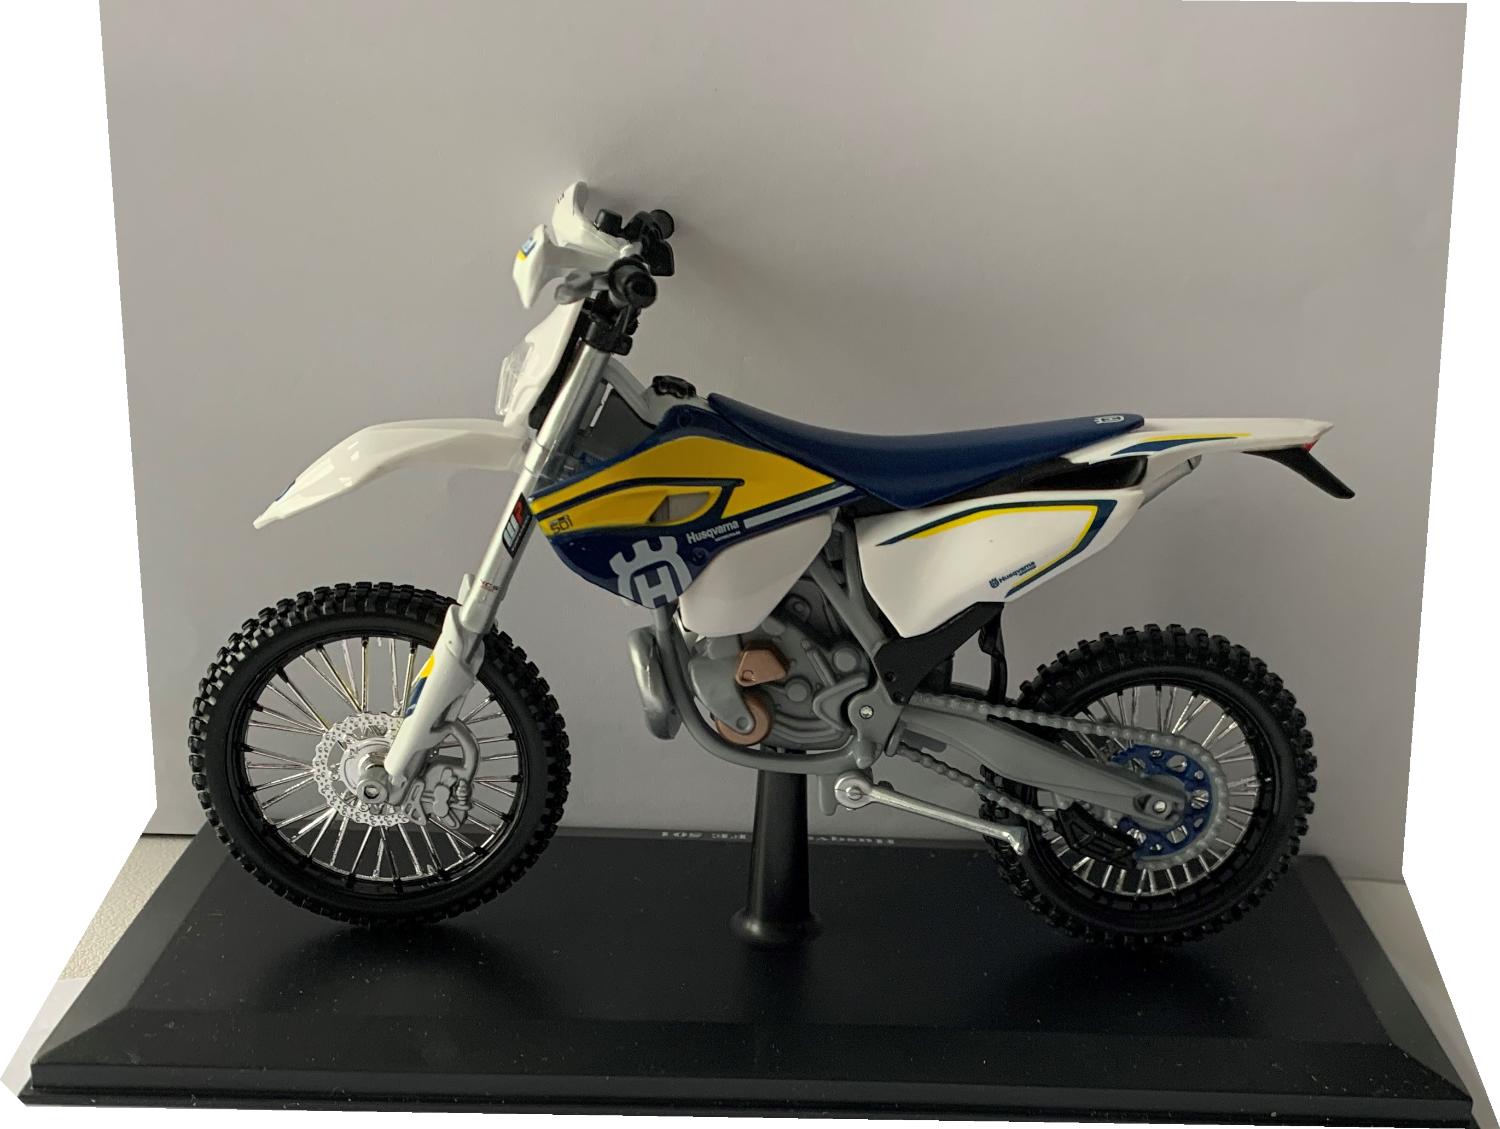 usqvarna FE 501 in white / blue / yellow 1:12 scale model from Maisto, mounted on a plinth in a Husqvarna themed box